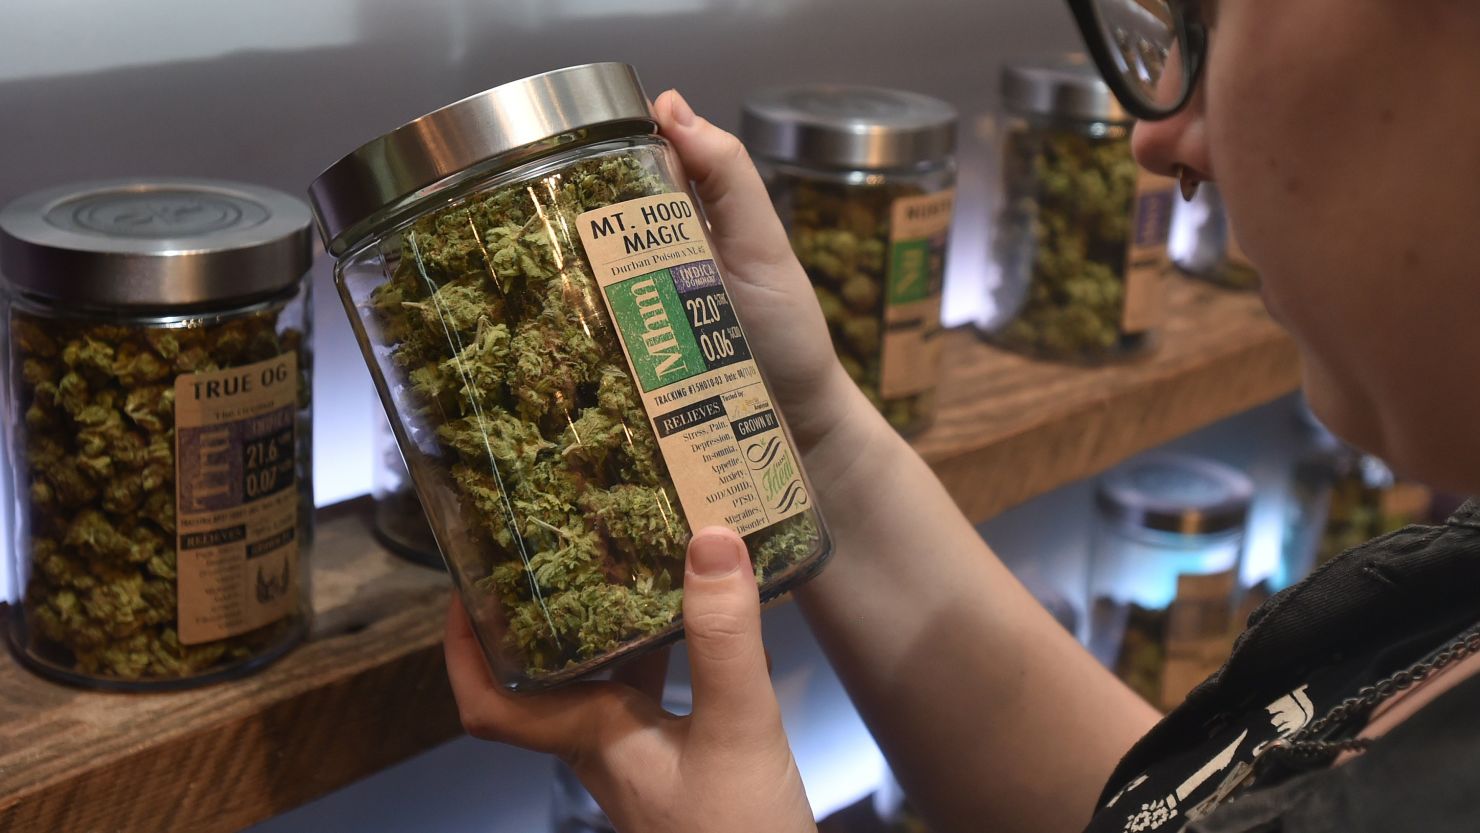 Marijuana sales in Oregon along the Idaho border are 420% higher than the statewide average, according to the state's Office of Economic Analysis.